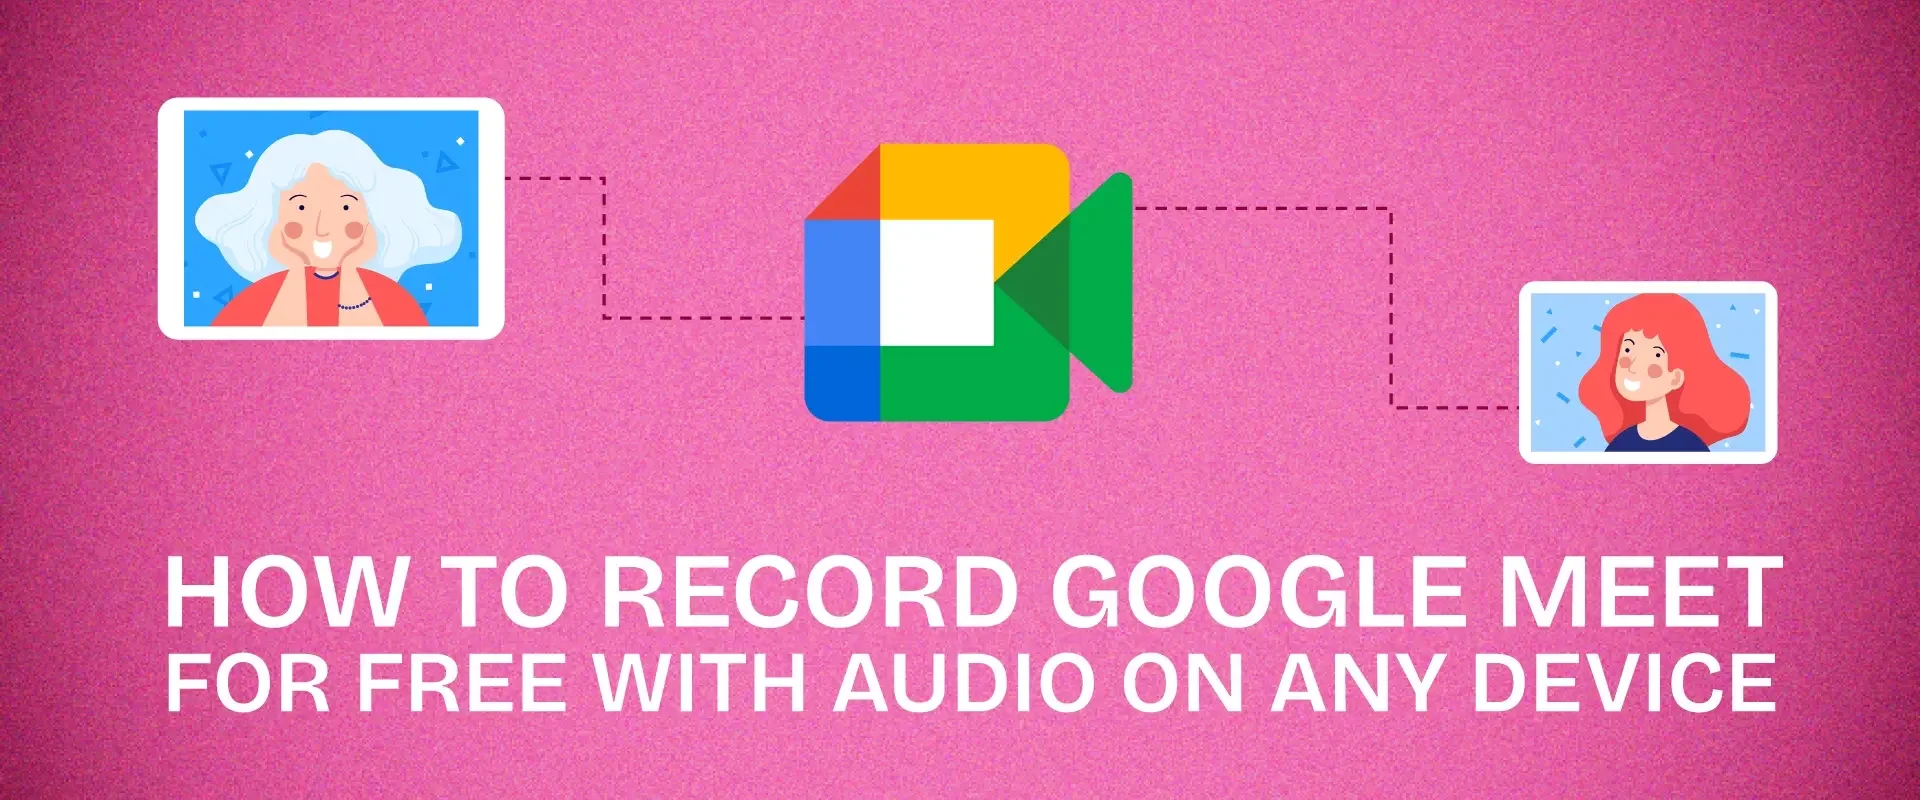 How to Record Google Meet for Free With Audio on Any Device